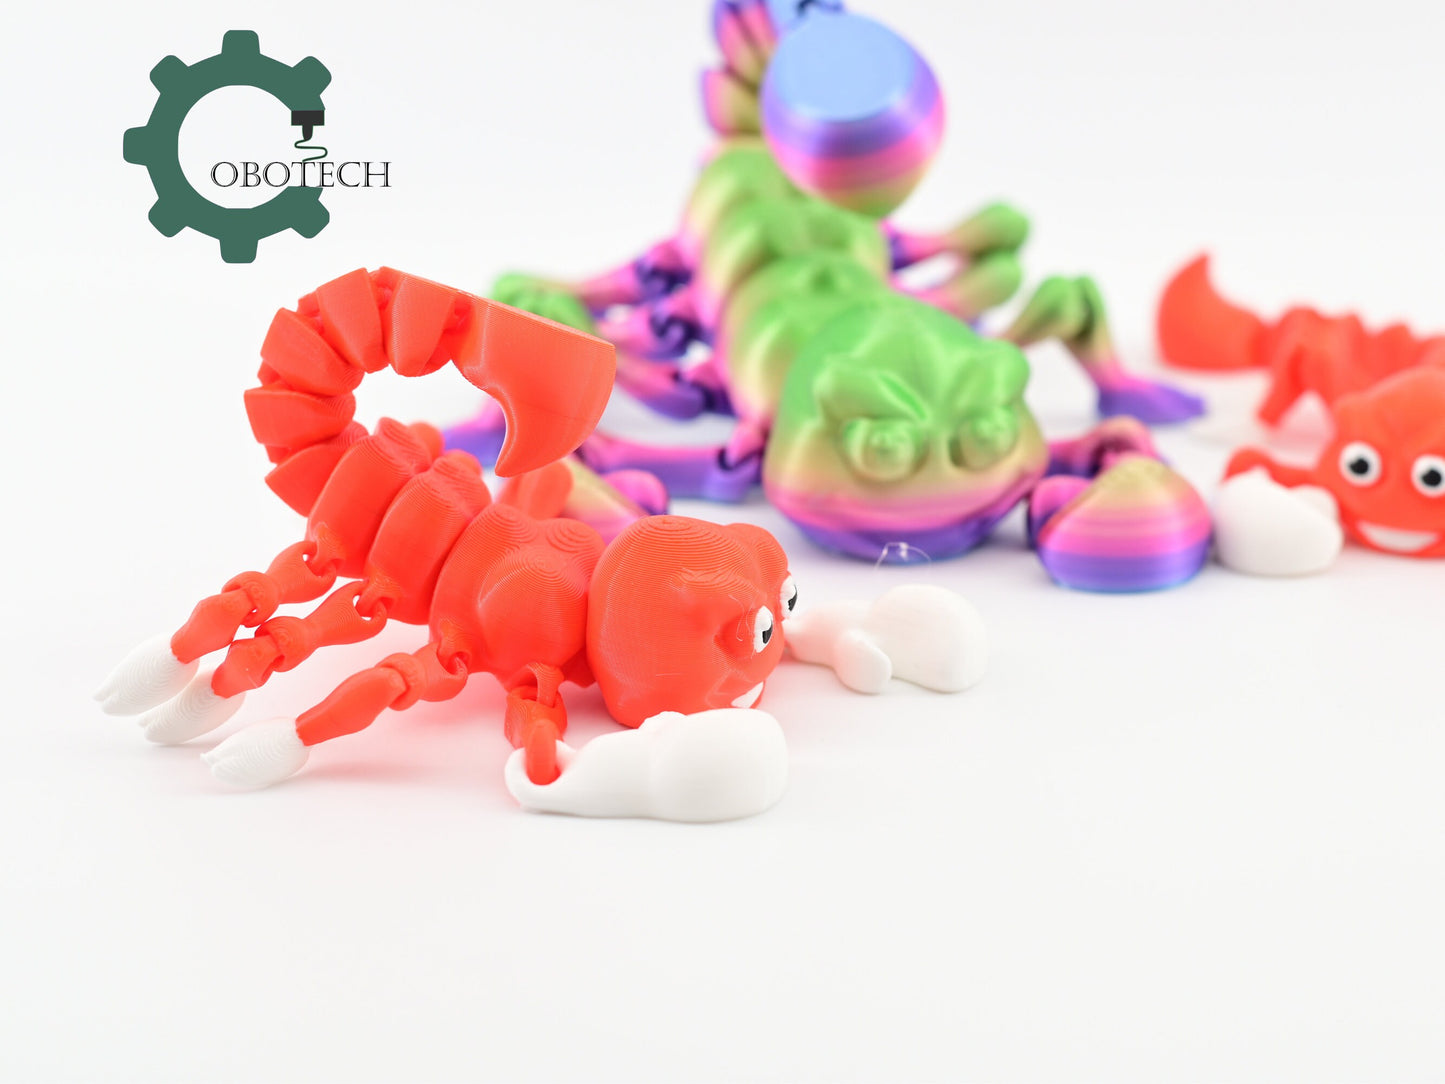 3D Print Articulated Scorpion Toy by Cobotech, Articulated Toys, Desk Decor, Cool Gift